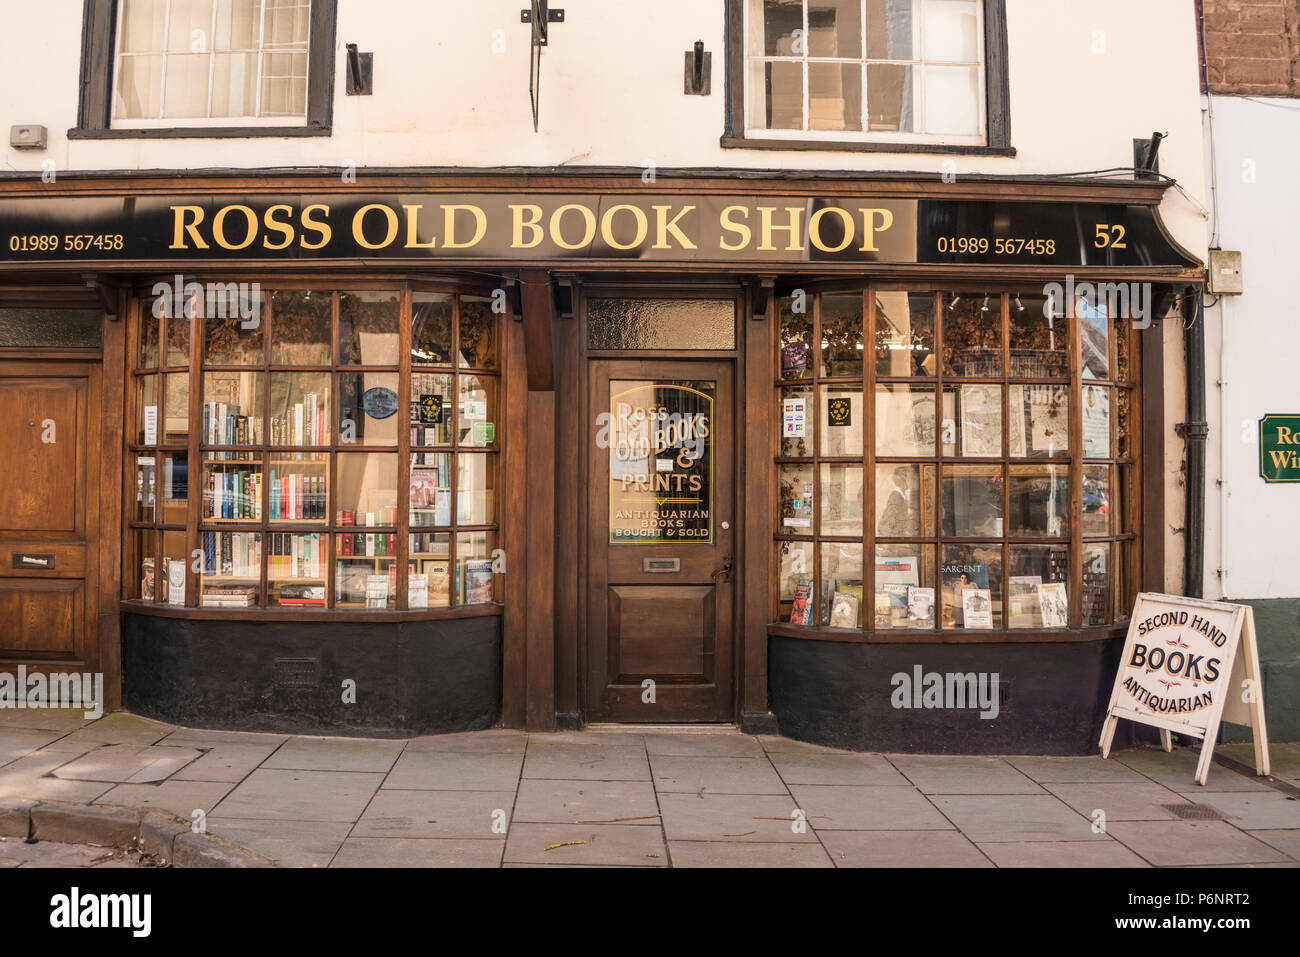 Ross Old Book Shop, High Street, Ross on Wye, Herefordshire, UK Stock Photo